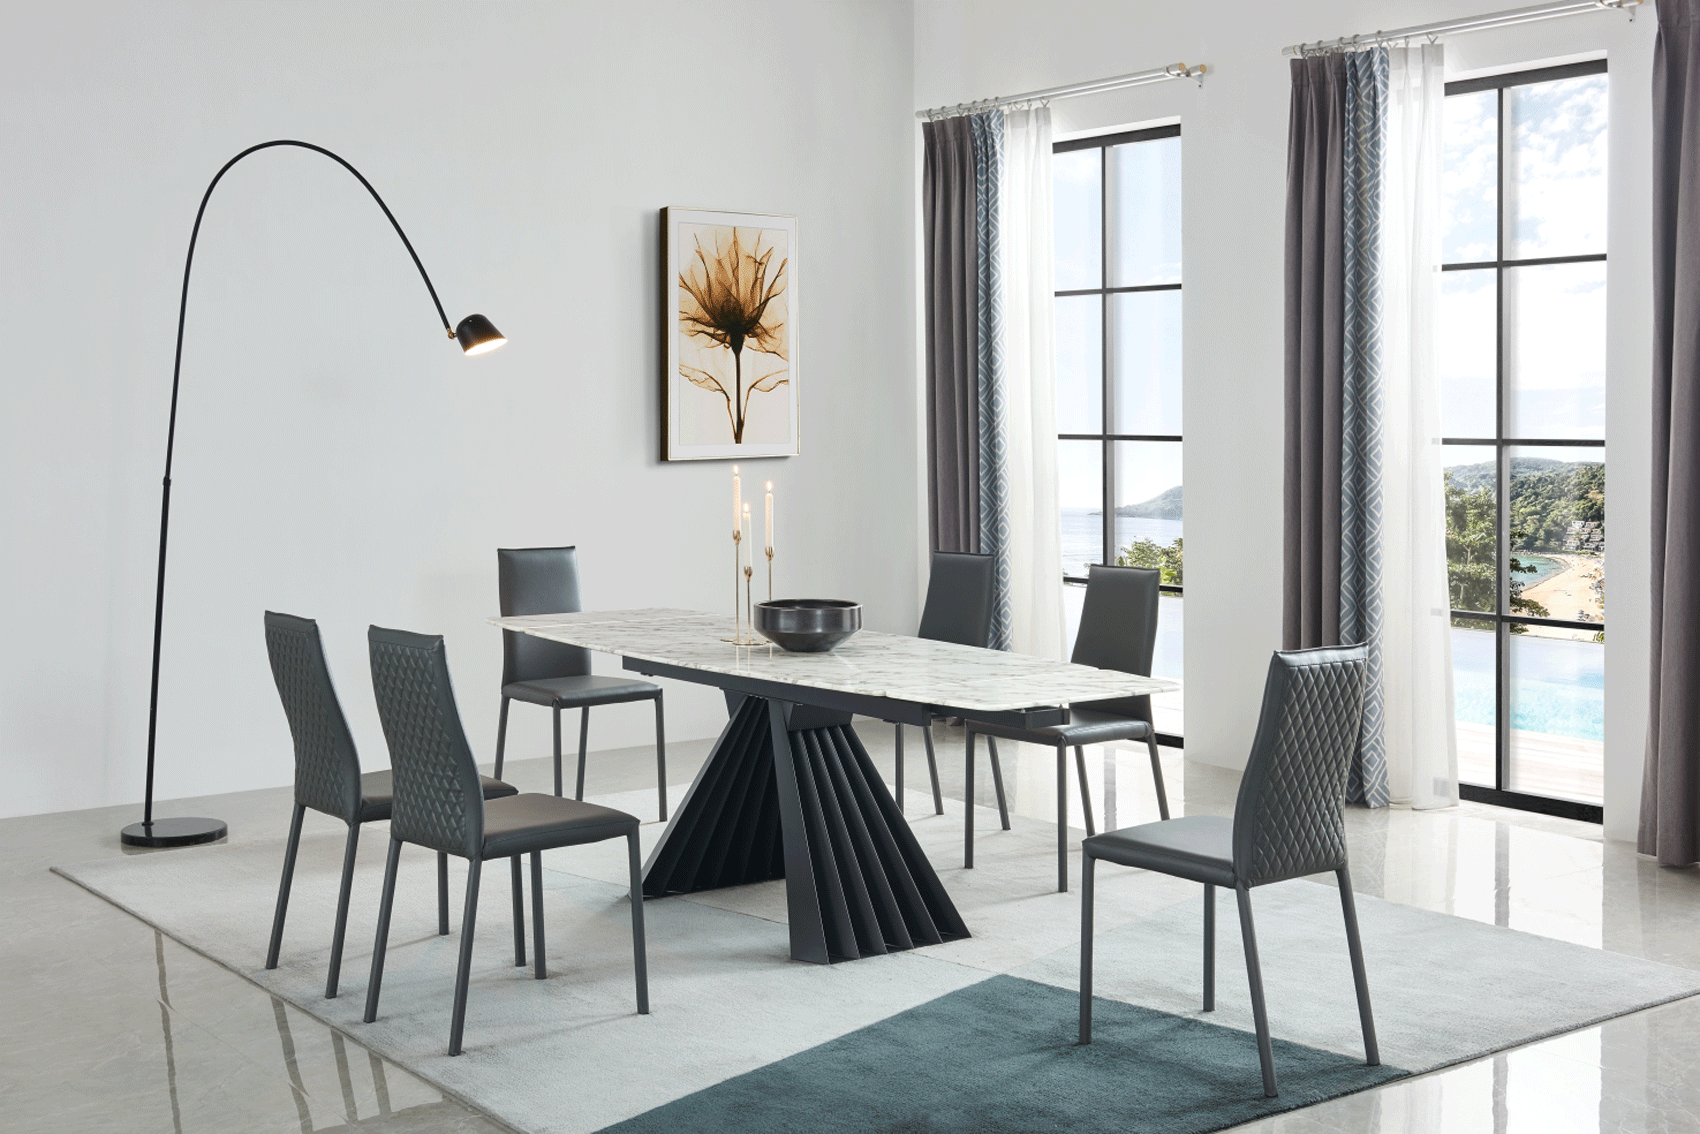 Dining Room Furniture Swivel Chairs 152 Marble Dining Table with 196 Grey Chairs